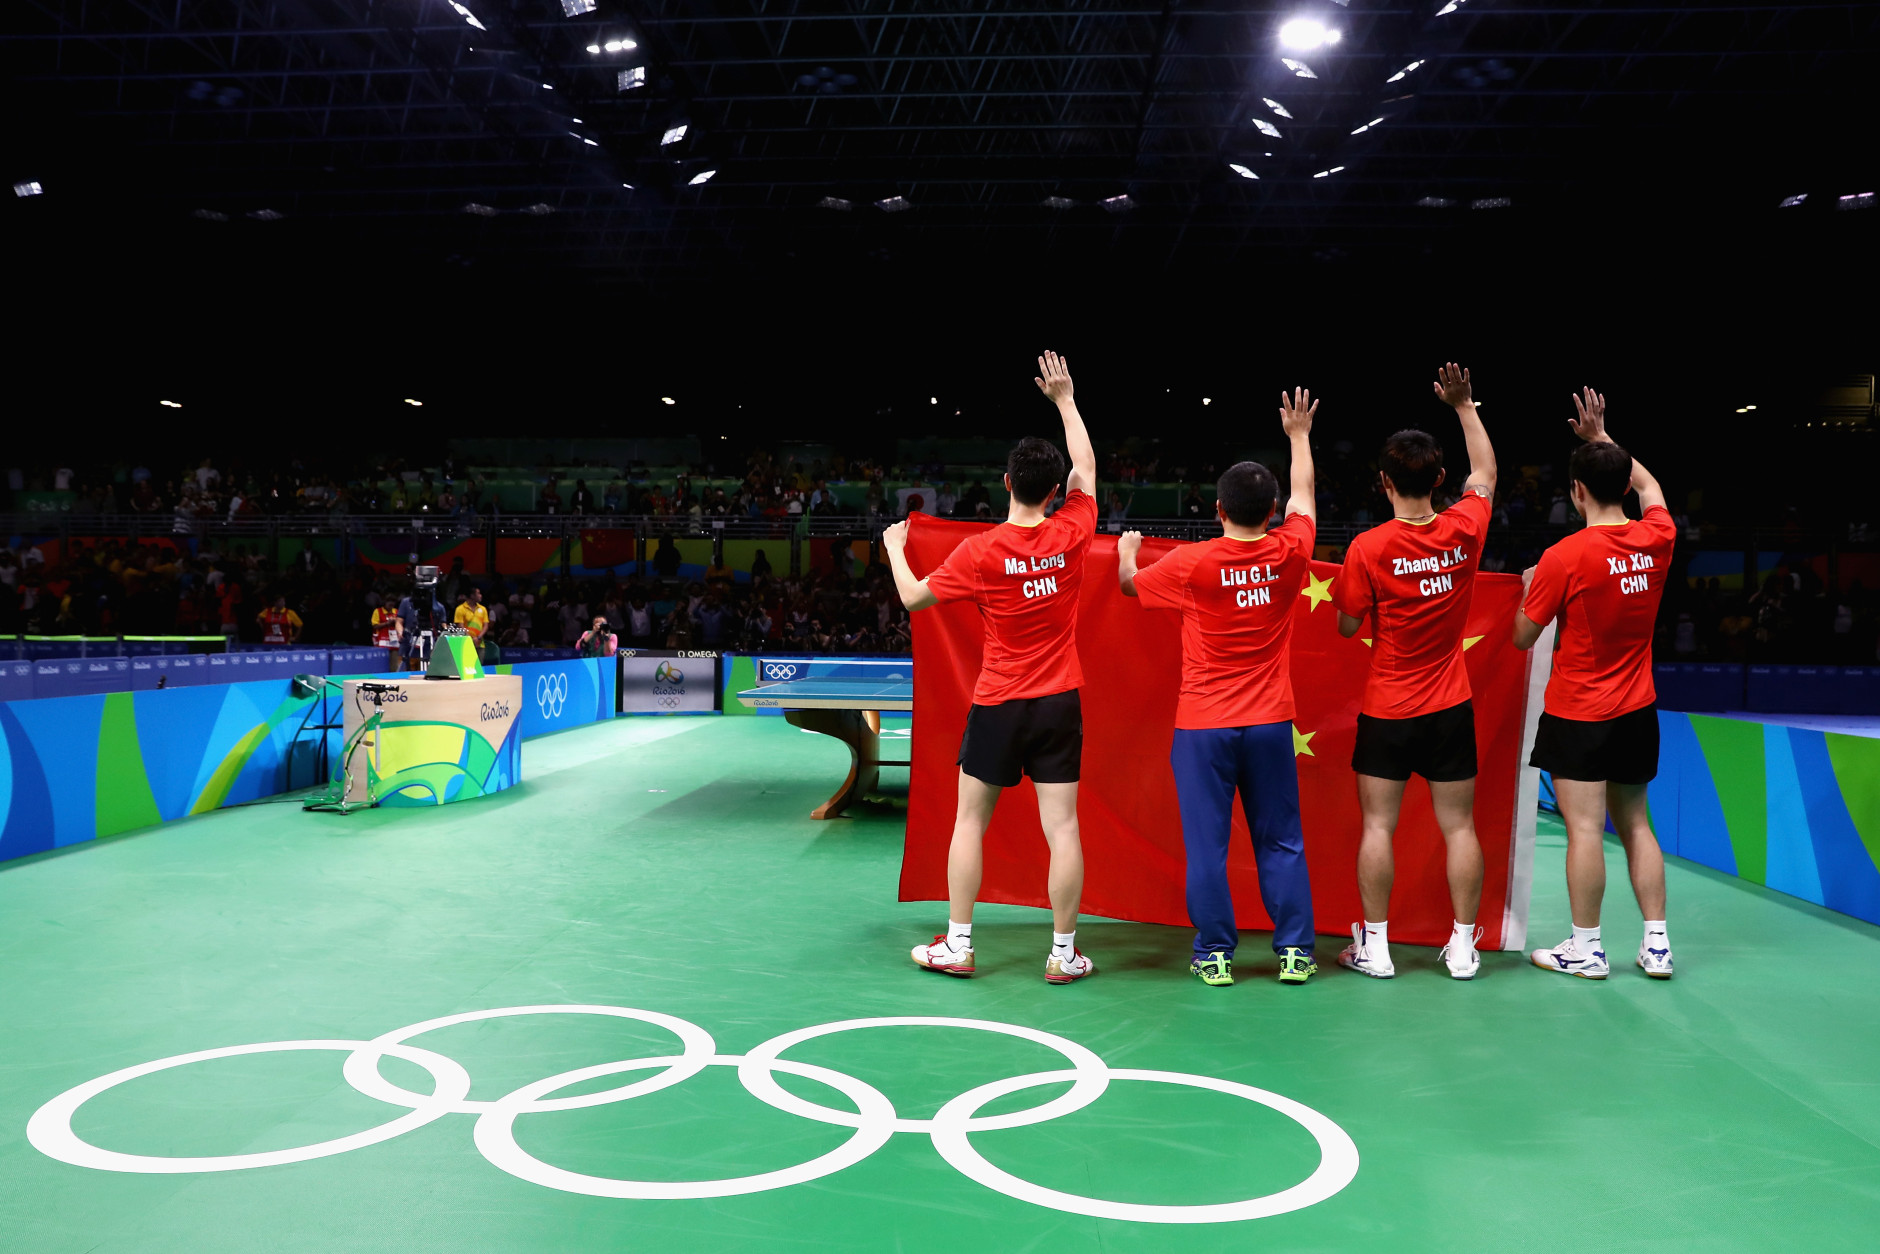 RIO DE JANEIRO, BRAZIL - AUGUST 17:  China celebrates winning the Men's Table Tennis gold medal match against Japan at Riocentro - Pavilion 3 on Day 12 of the Rio 2016 Olympic Games  on August 17, 2016 in Rio de Janeiro, Brazil.  (Photo by Phil Walter/Getty Images)